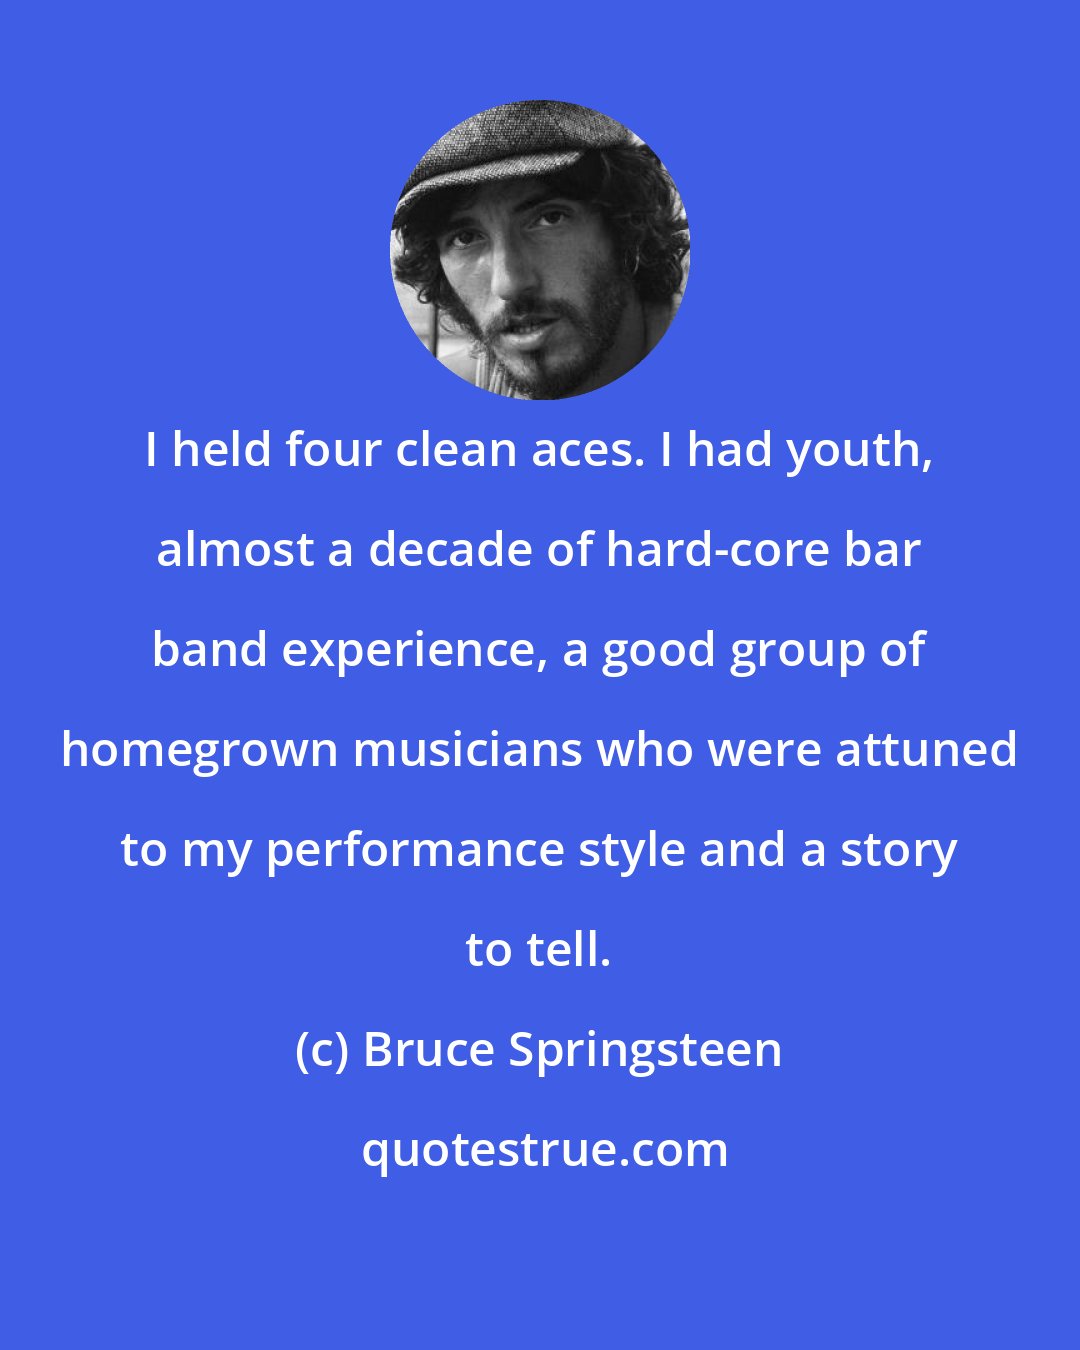 Bruce Springsteen: I held four clean aces. I had youth, almost a decade of hard-core bar band experience, a good group of homegrown musicians who were attuned to my performance style and a story to tell.